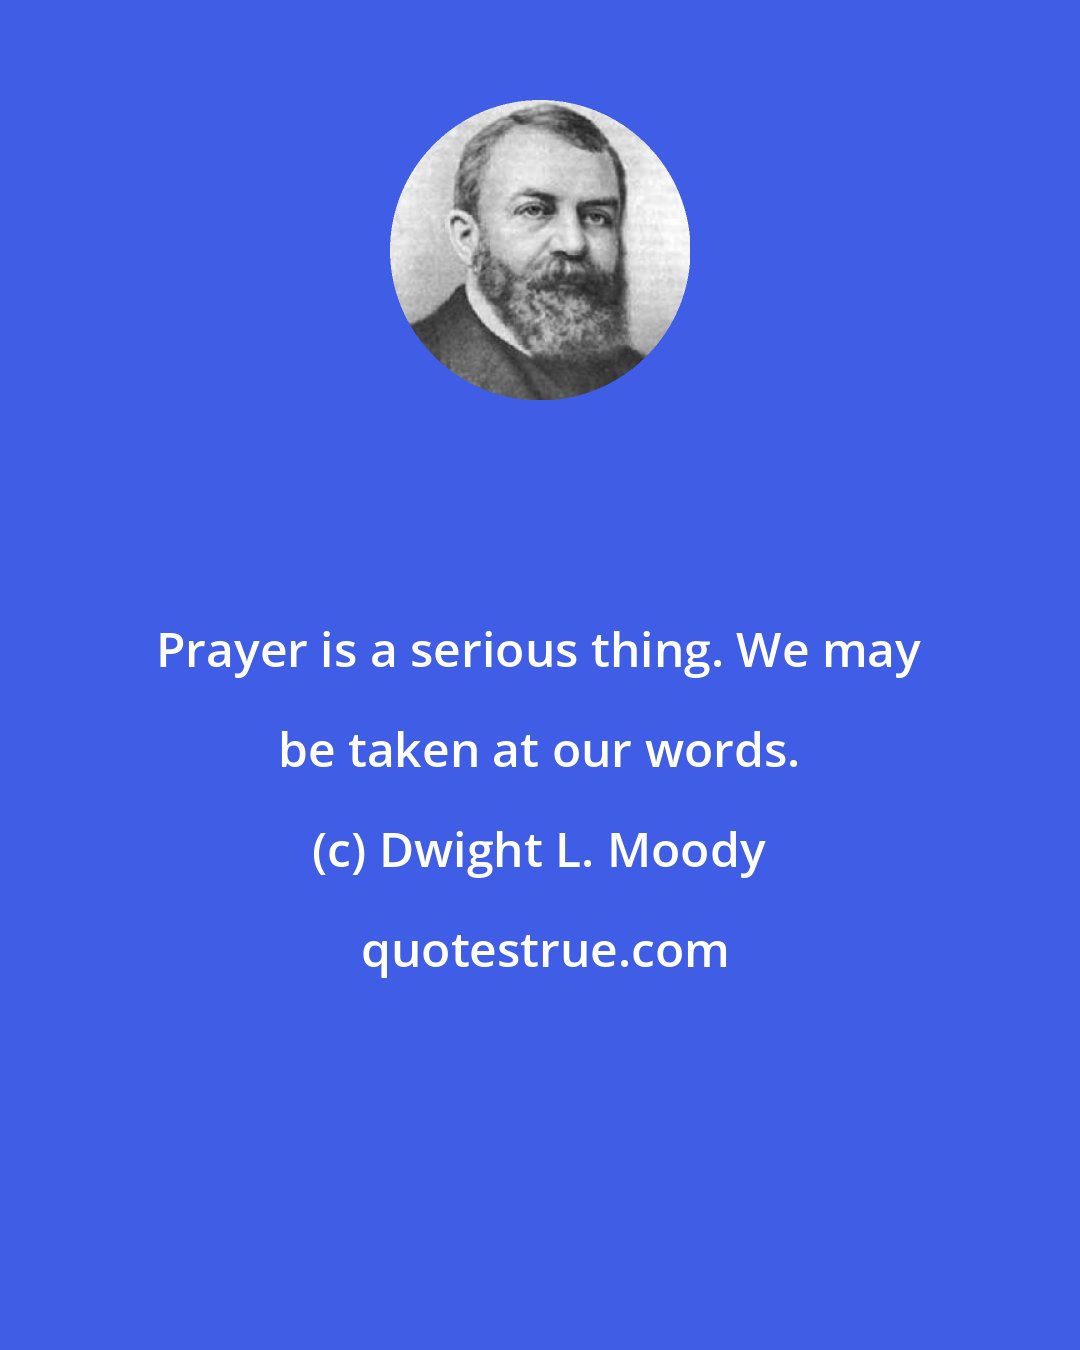 Dwight L. Moody: Prayer is a serious thing. We may be taken at our words.